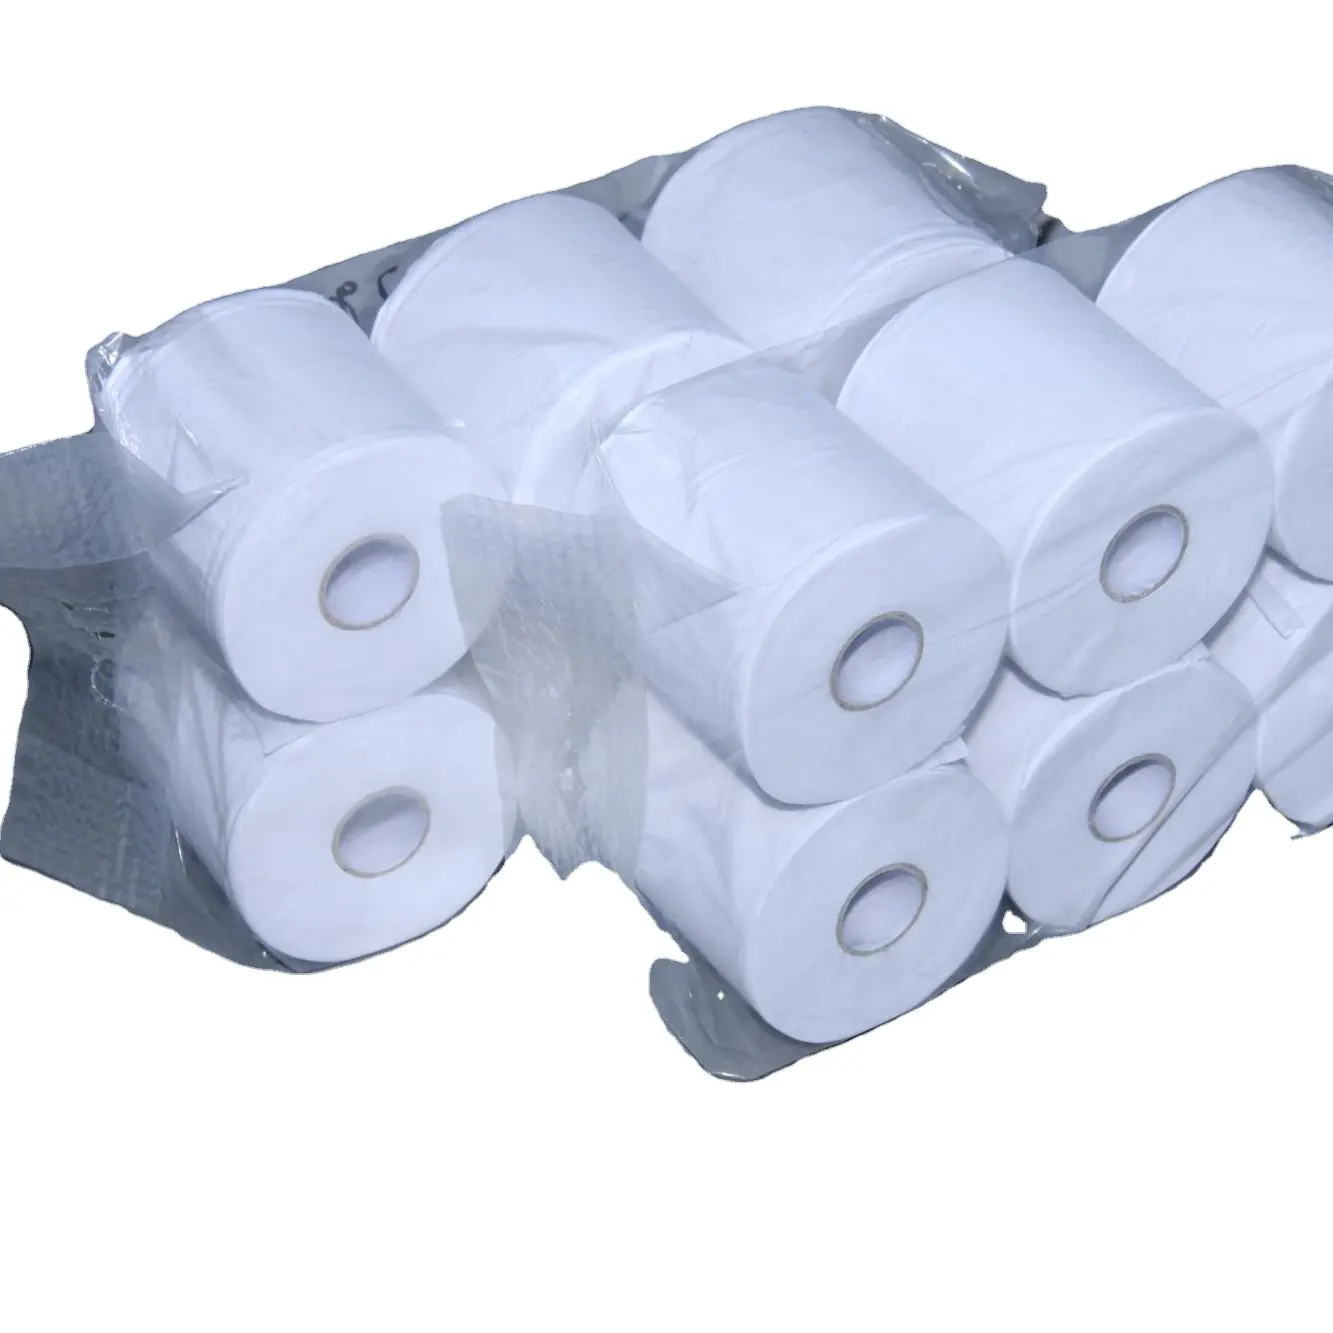 OEM Clean Toilet Paper Strong Bath Tissue 24 Family Mega Rolls Ultra soft 1ply 2ply 3ply wood/bamboo toilet tissue